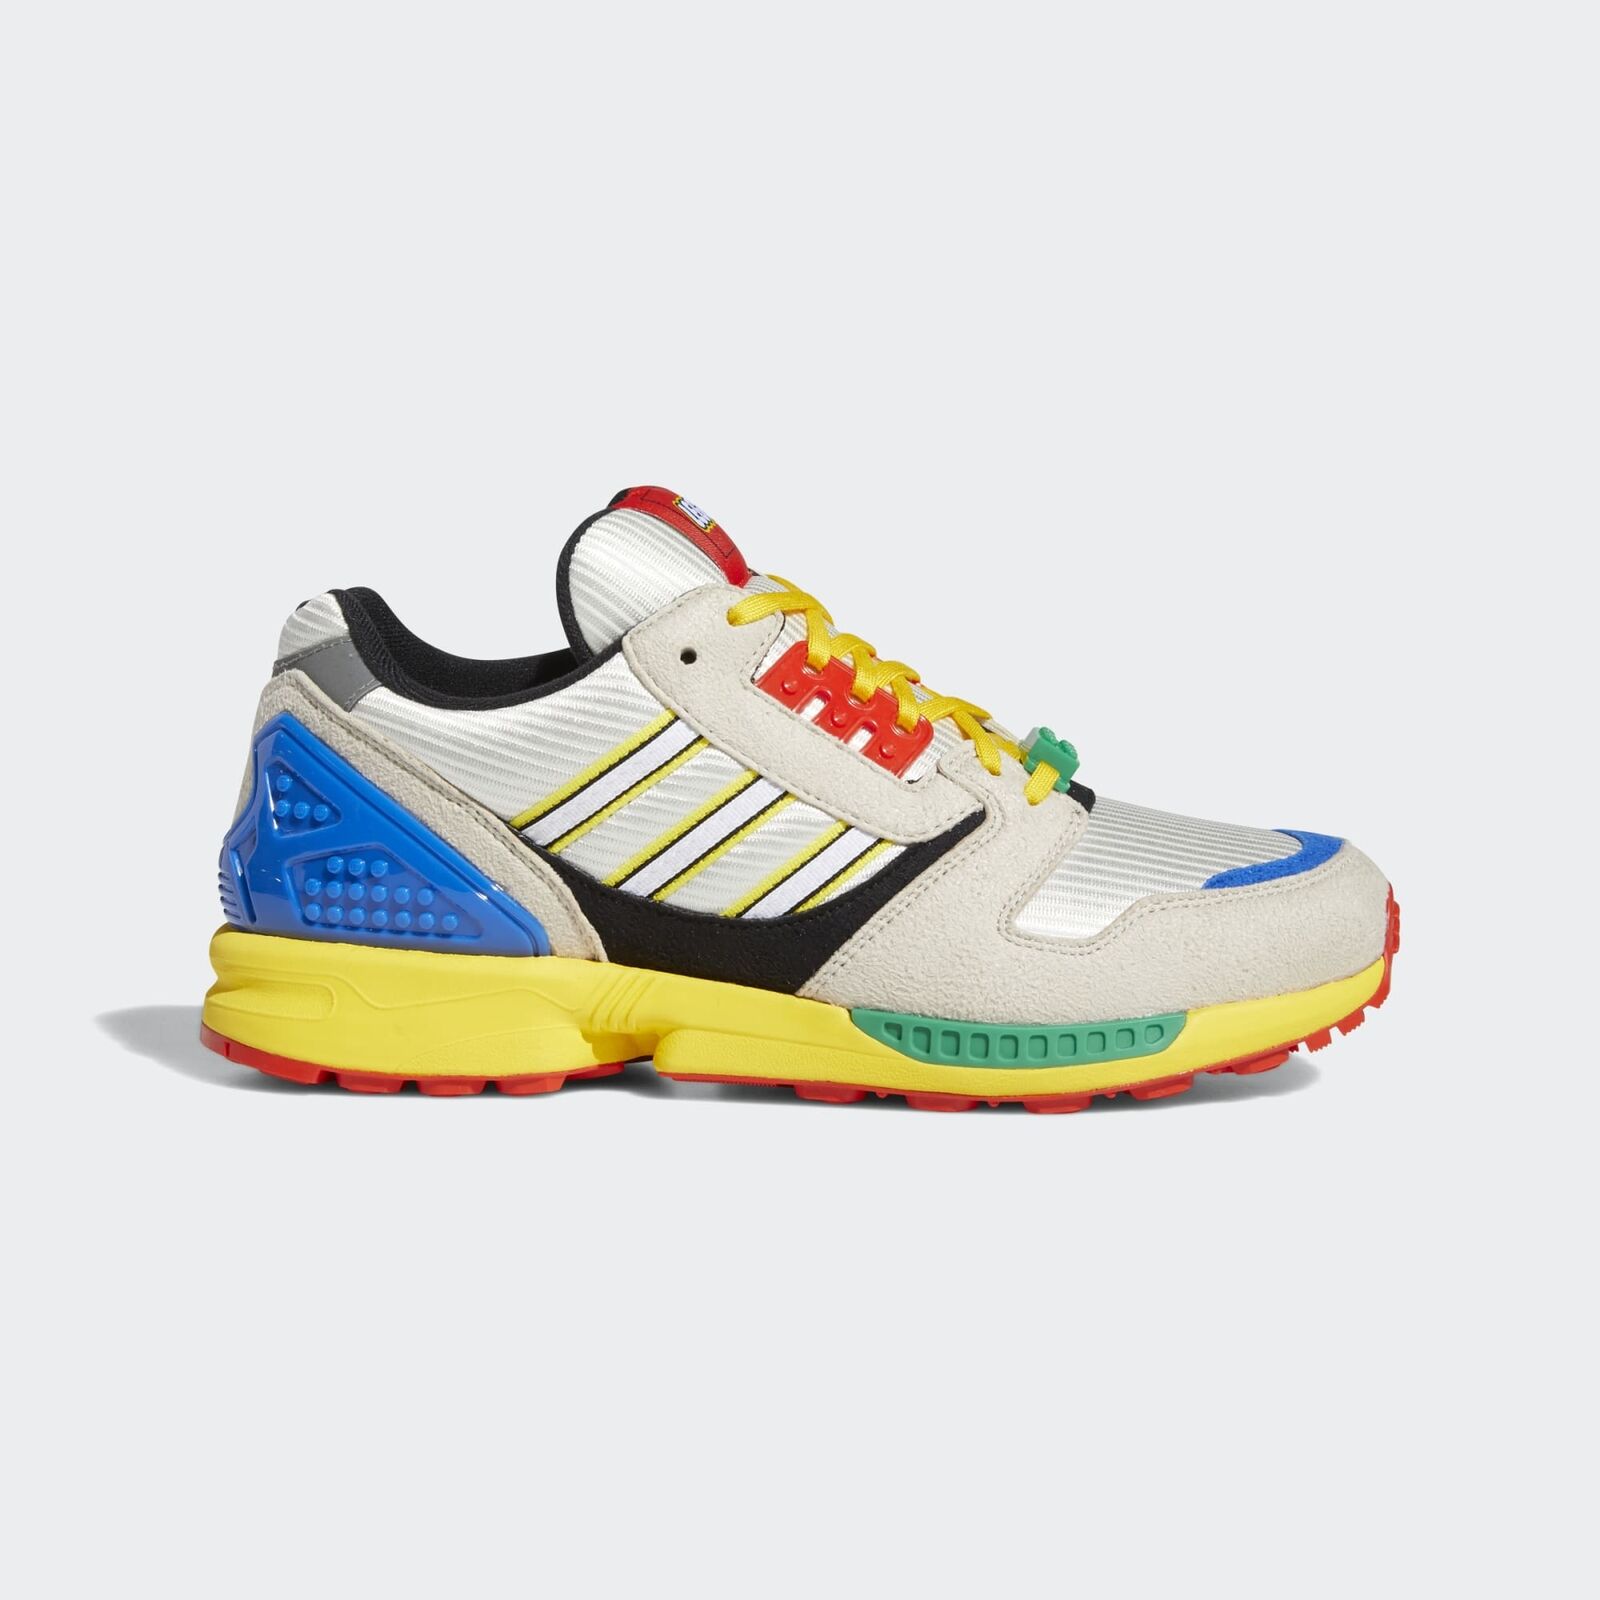 Adidas ZX 8000 LEGO Limited Edition Shoes Men's Size 6-14 